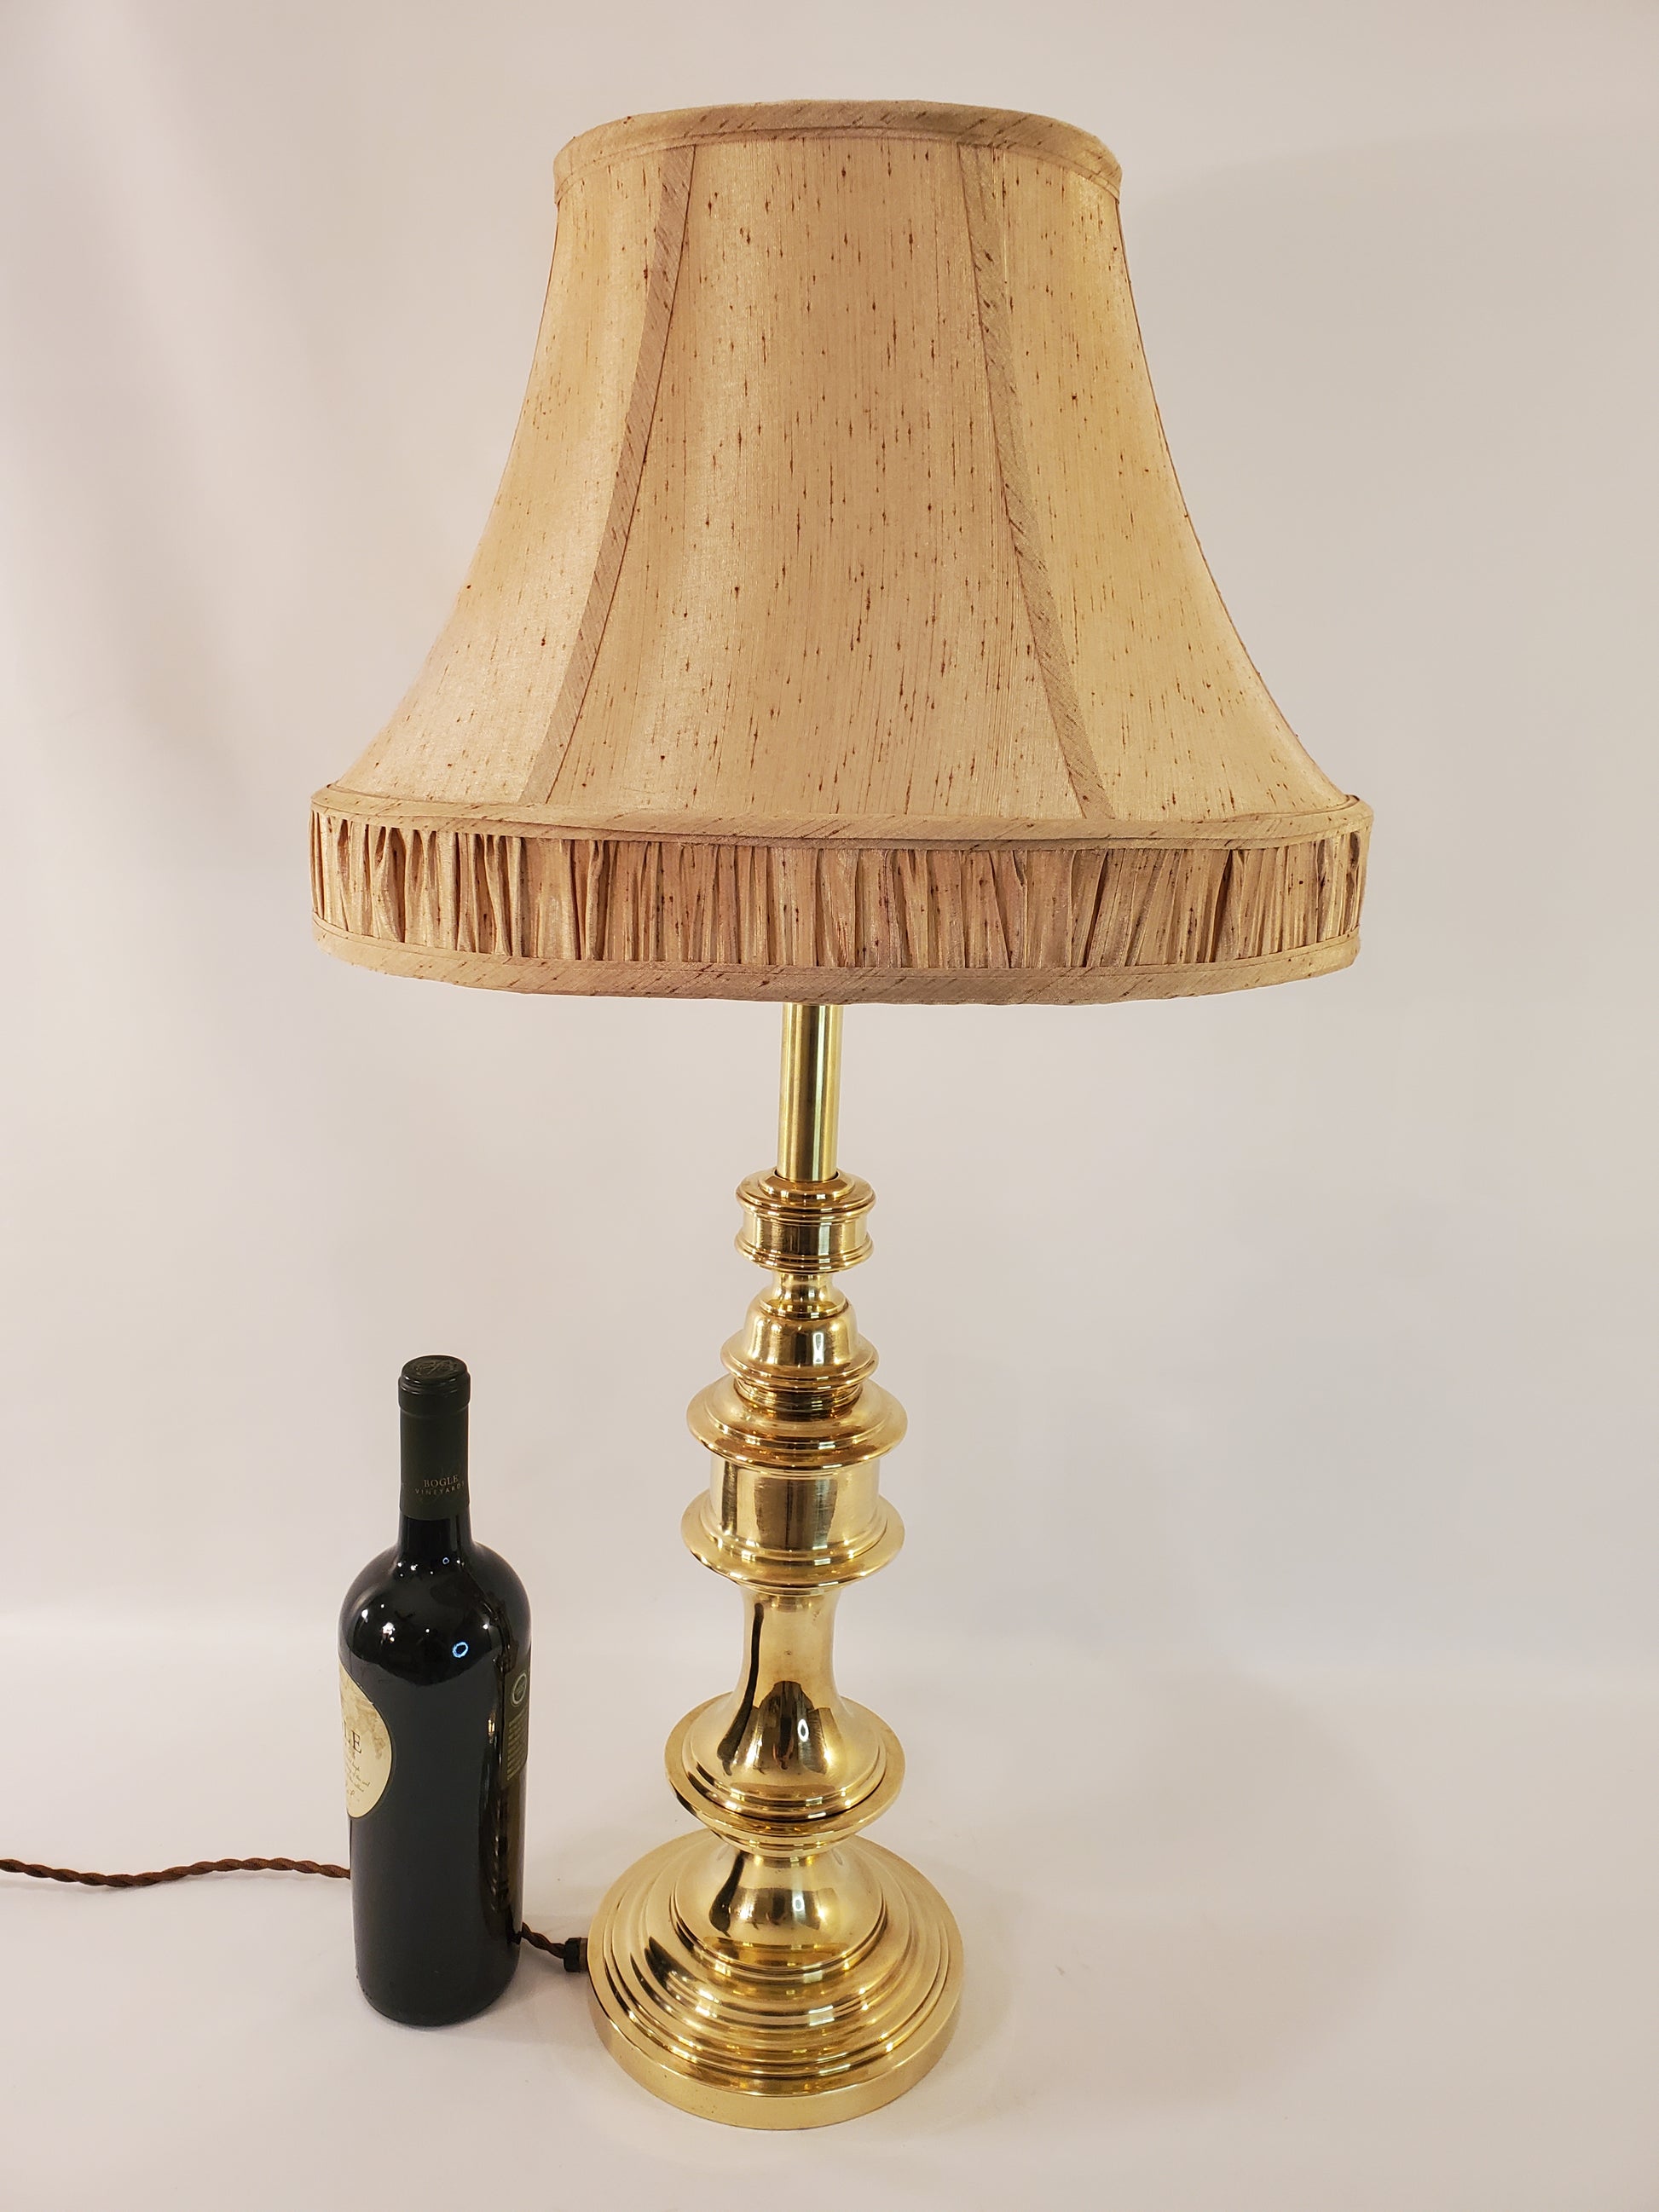 Vintage Stiffel Table Lamp Brass Candlestick Lamp With Original